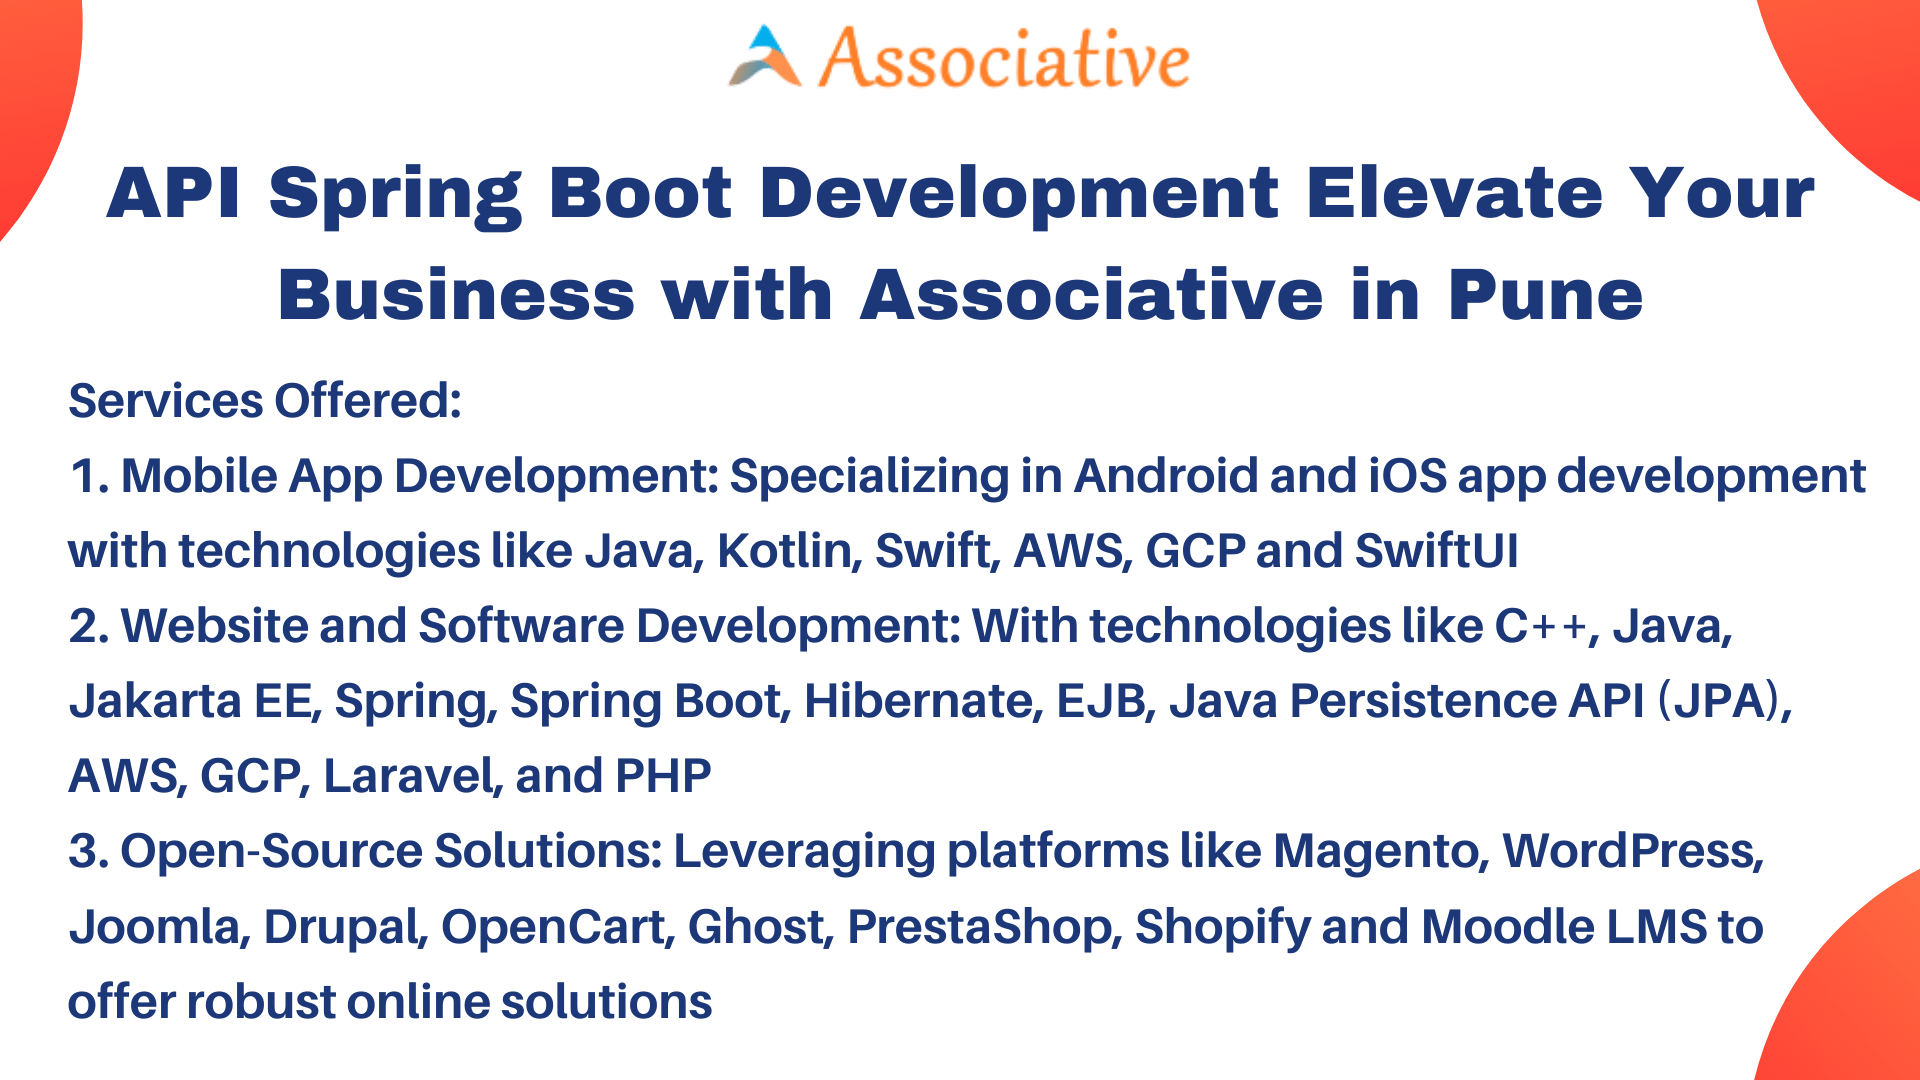 API Spring Boot Development Elevate Your Business with Associative in Pune